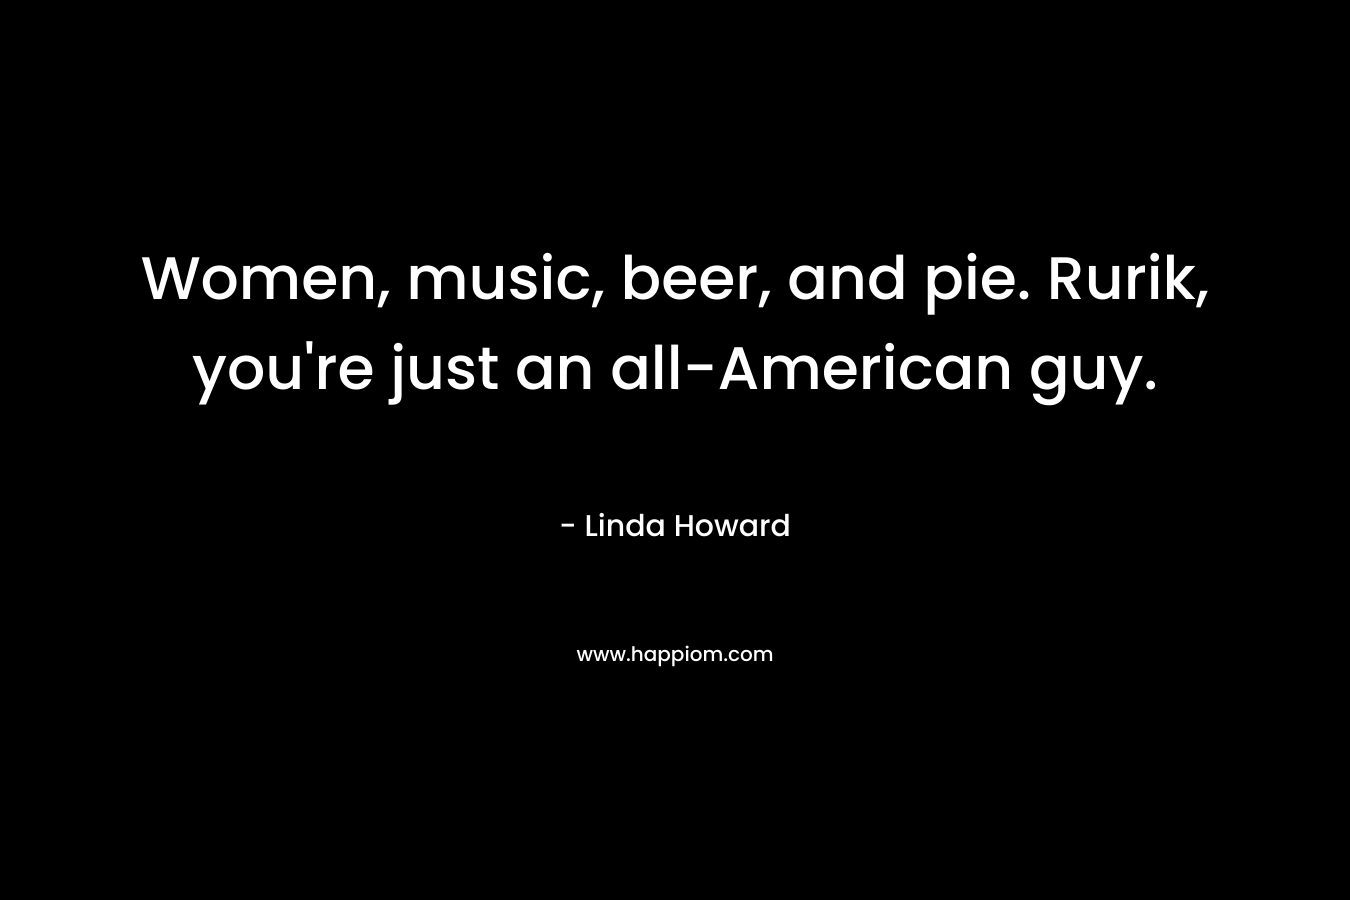 Women, music, beer, and pie. Rurik, you're just an all-American guy.